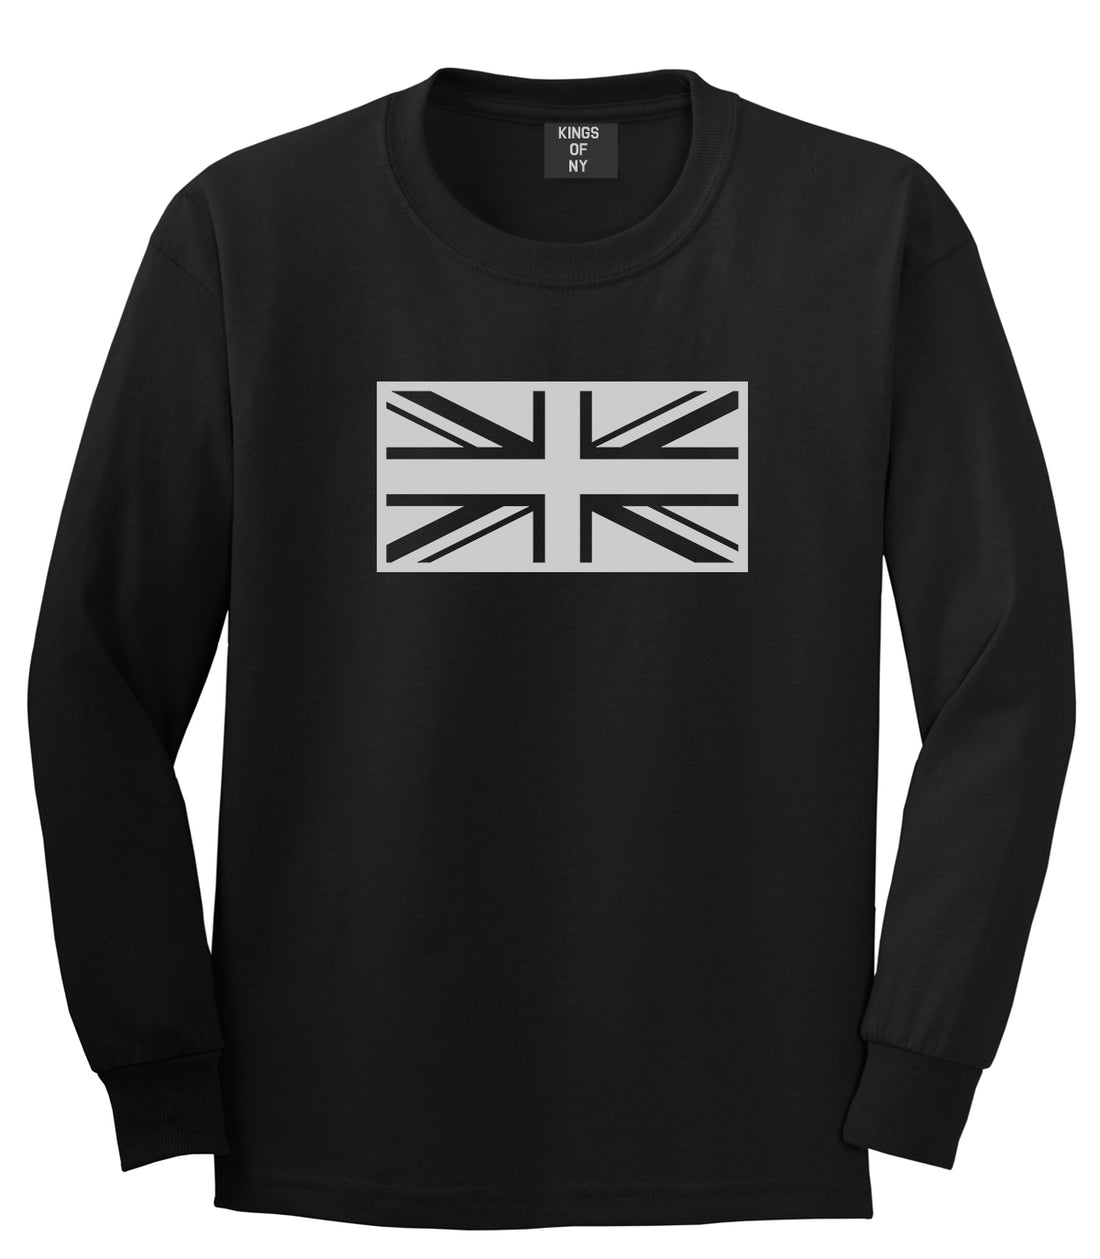 British Army Style Black Long Sleeve T-Shirt by Kings Of NY